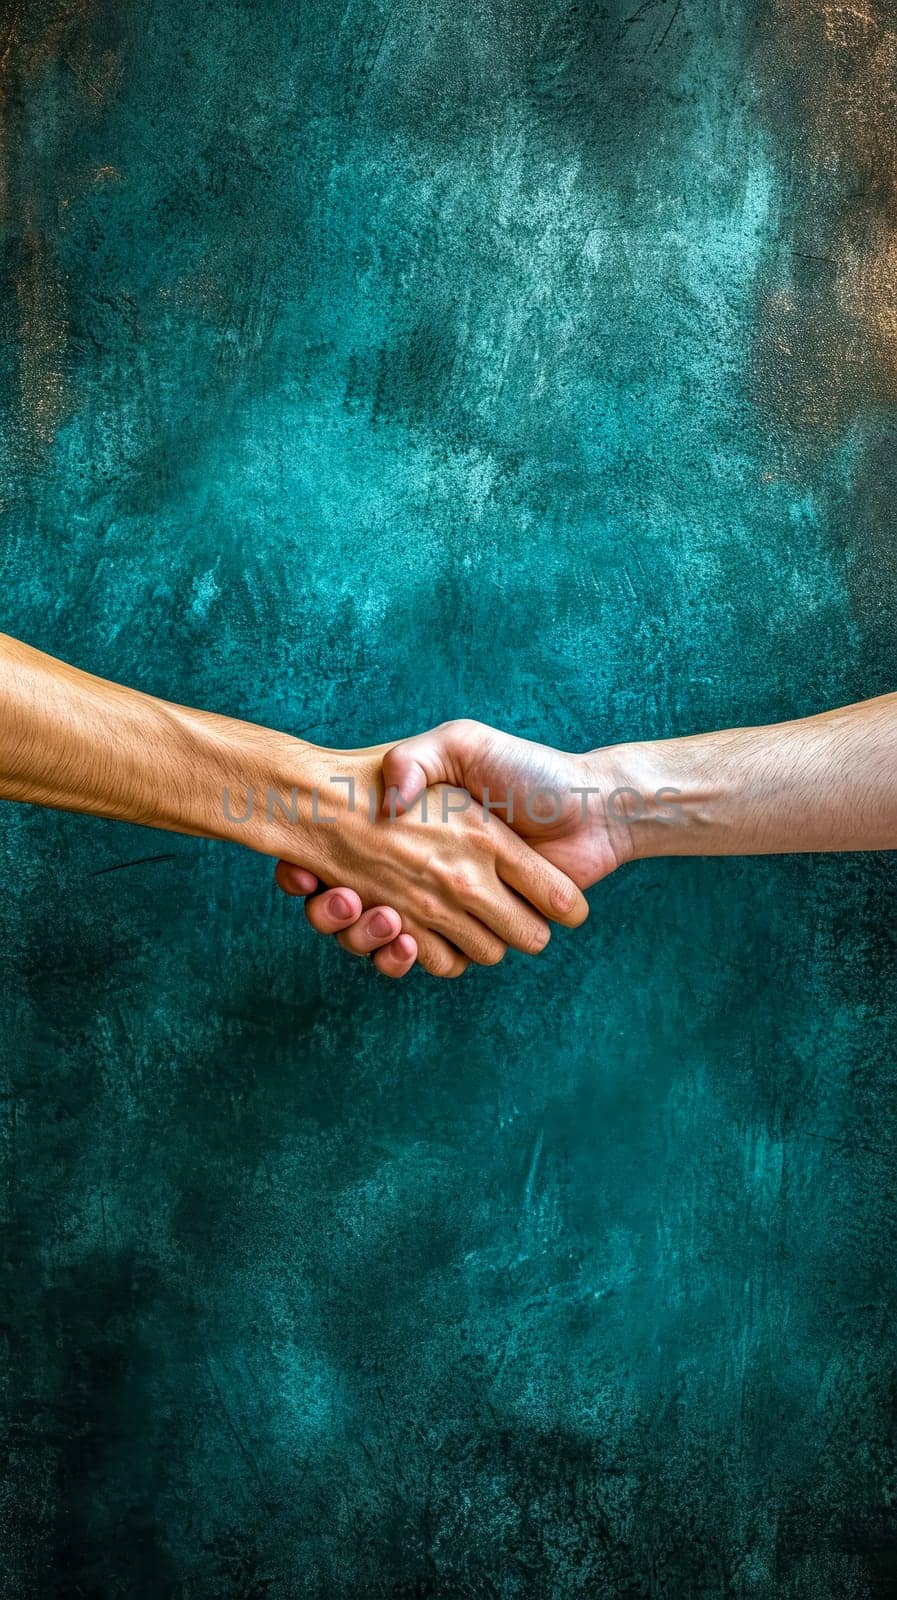 two hands engaged in a firm handshake, set against a textured turquoise and teal background that provides a rustic and artistic feel. by Edophoto